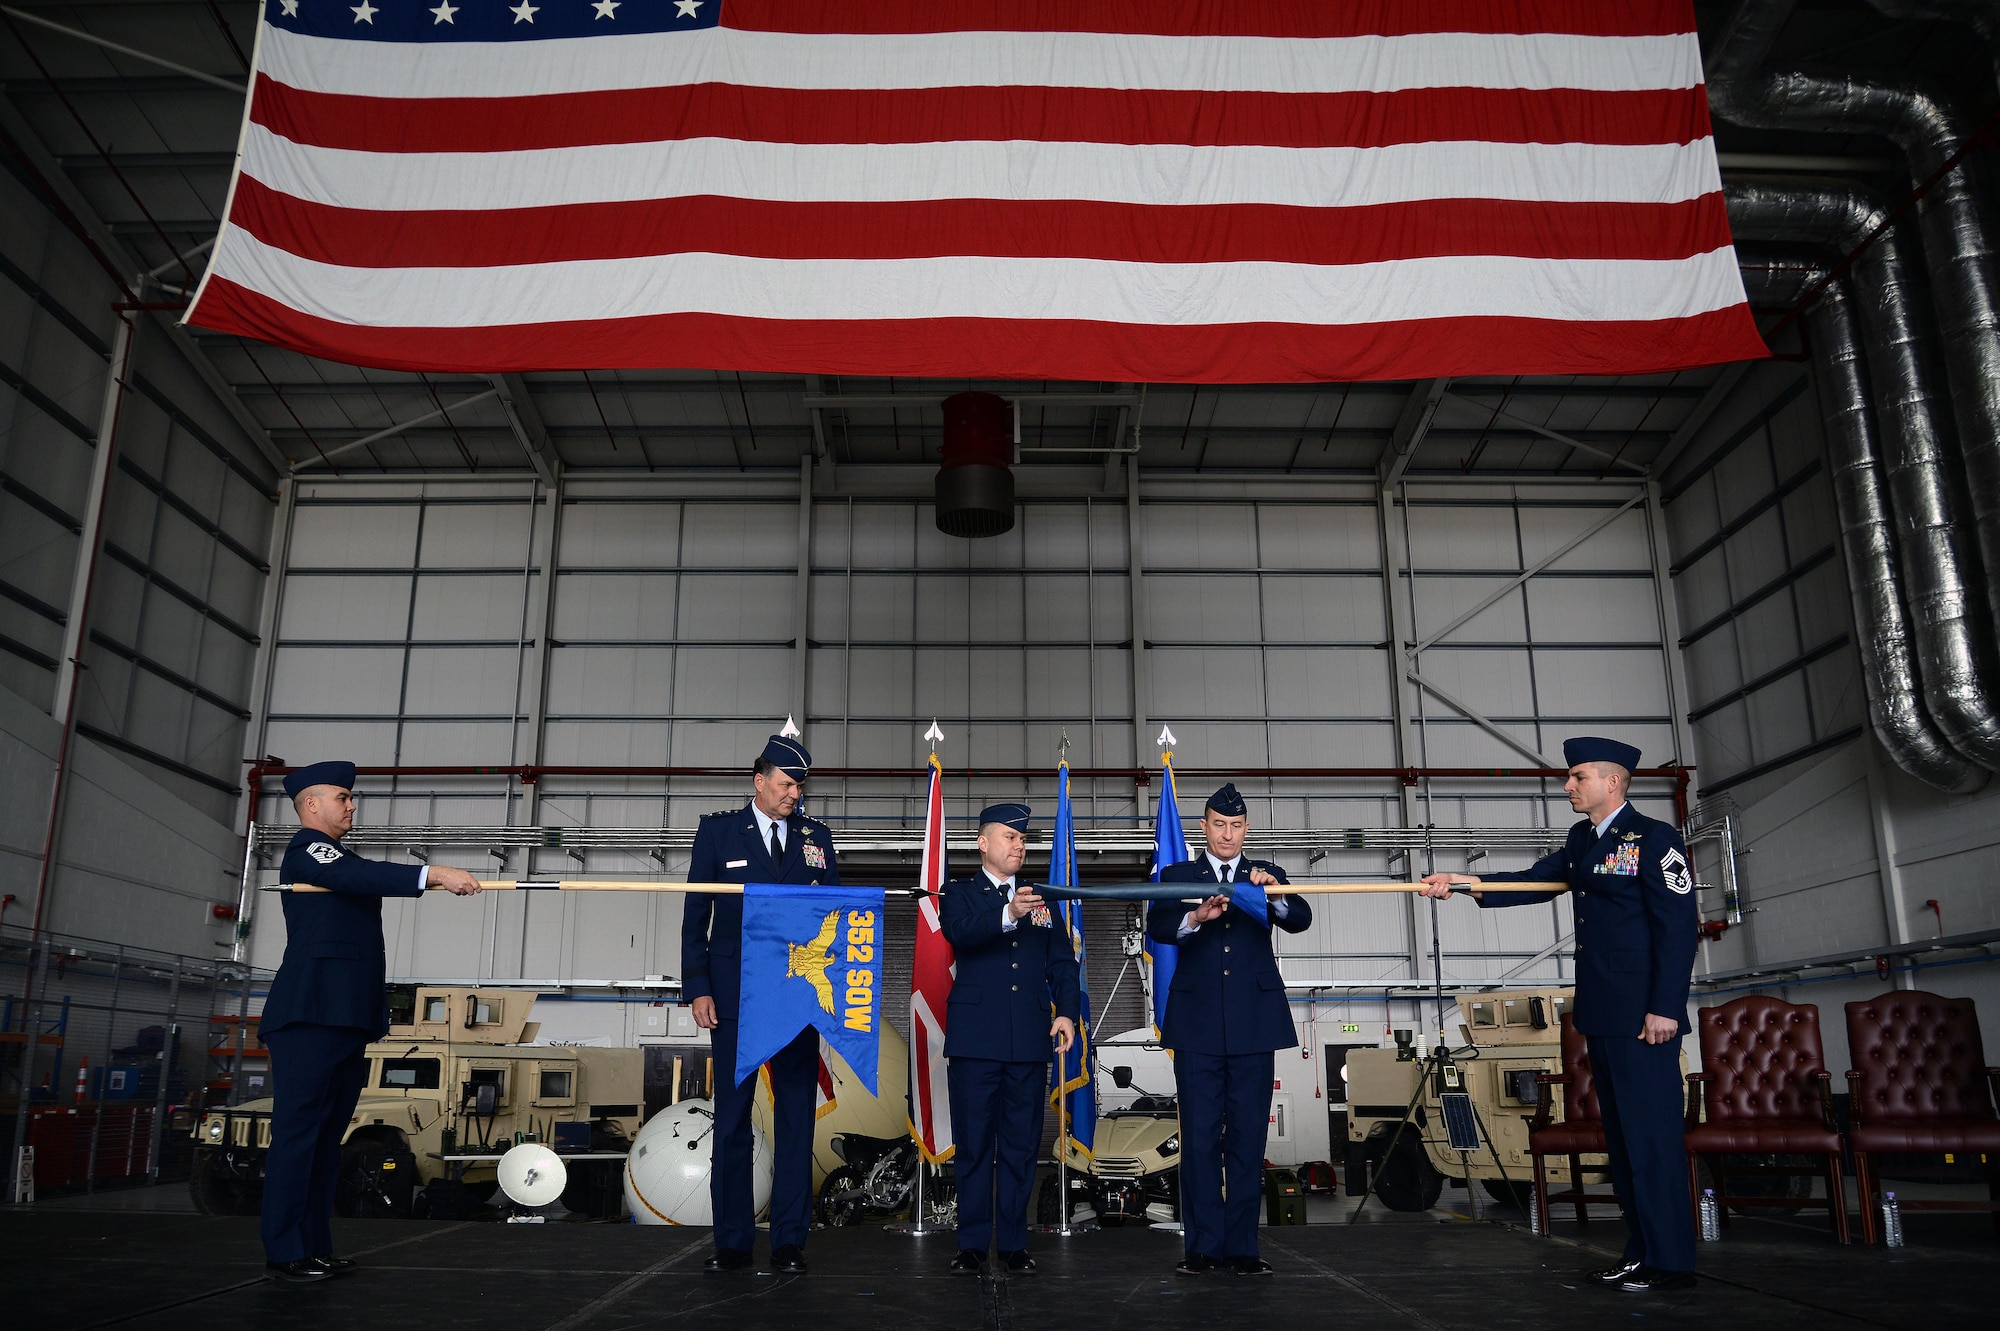 U.S. Air Force Lt. Gen. Brad A. Heithold, second from left, Air Force Special Operations Command commander, U.S. Air Force Col. William Holt, center, 352nd Special Operations Wing commander, and U.S. Air Force Lt. Col. Nathan Green, second from right, 752nd Special Operations Group commander, perform the 352nd SOW activation ceremony, March 23, 2015, on RAF Mildenhall, England. The 352nd SOW is responsible for planning and executing specialized and contingency operations using advanced aircraft, tactics and air refueling techniques to infiltrate, exfiltrate and resupply special operations forces.  (U.S. Air Force photo by Senior Airman Christine Griffiths)